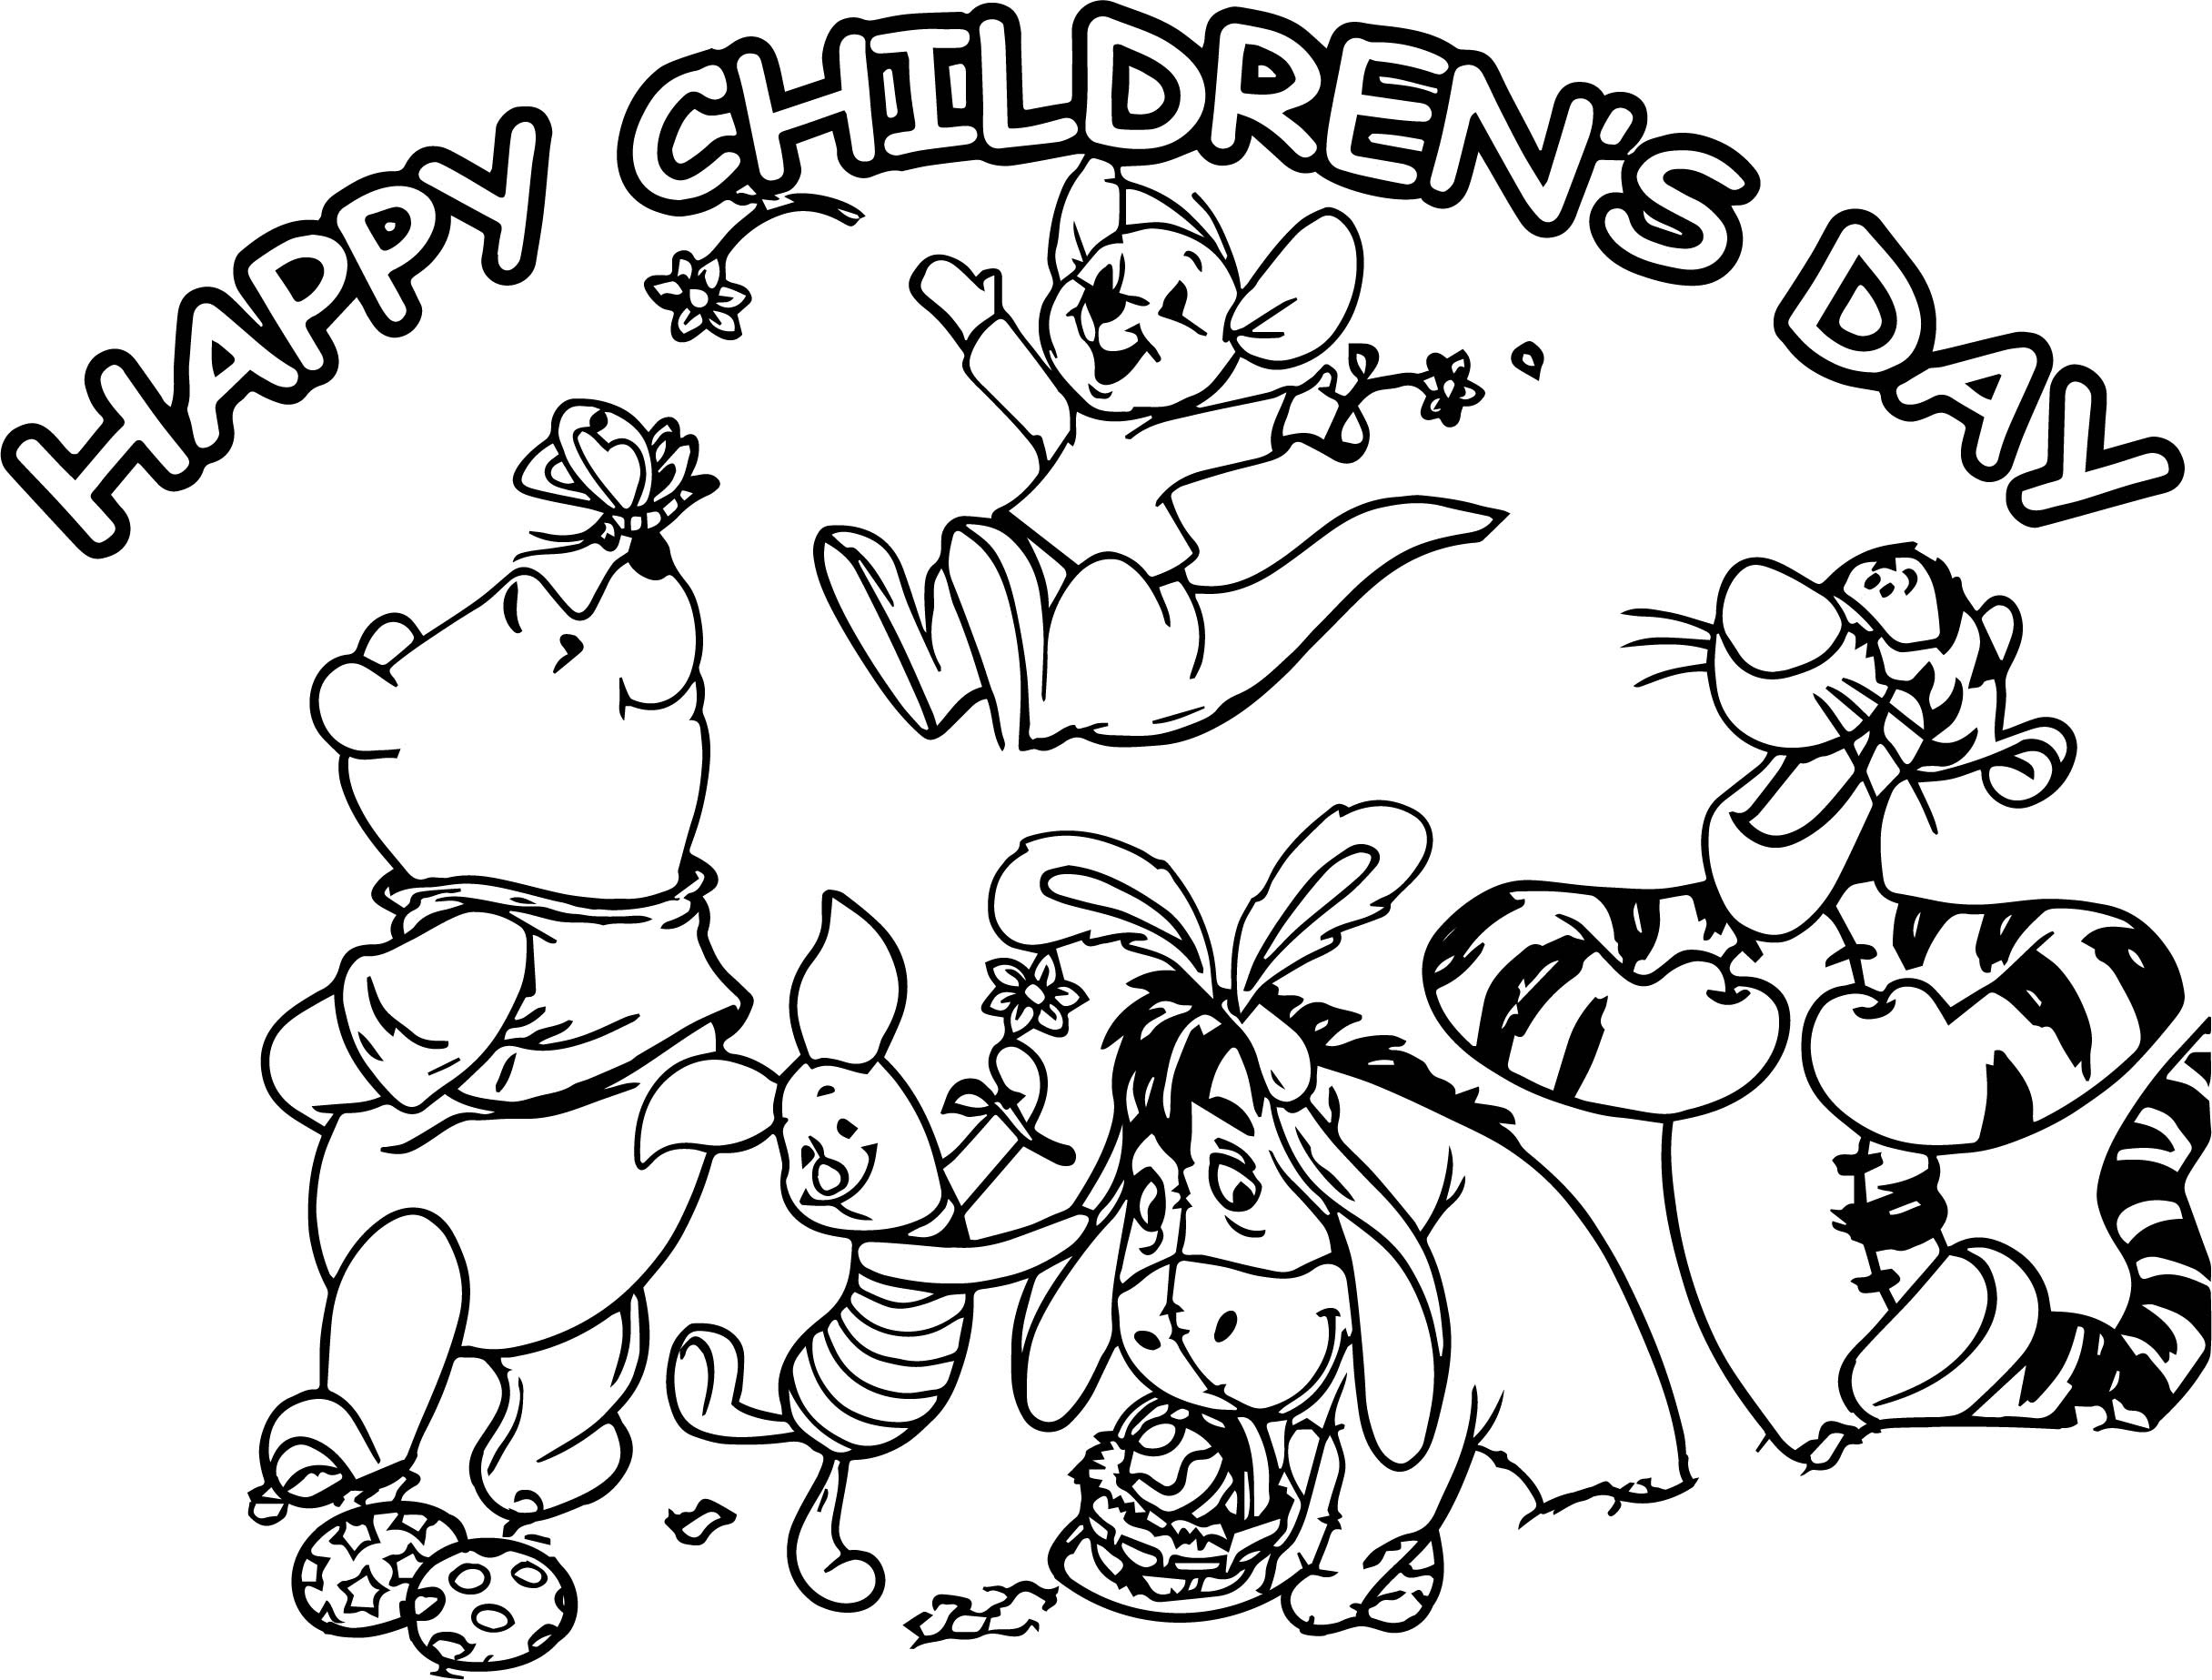 Download Happy Childrens Day Animal Kingdom Graphic For Share On ...